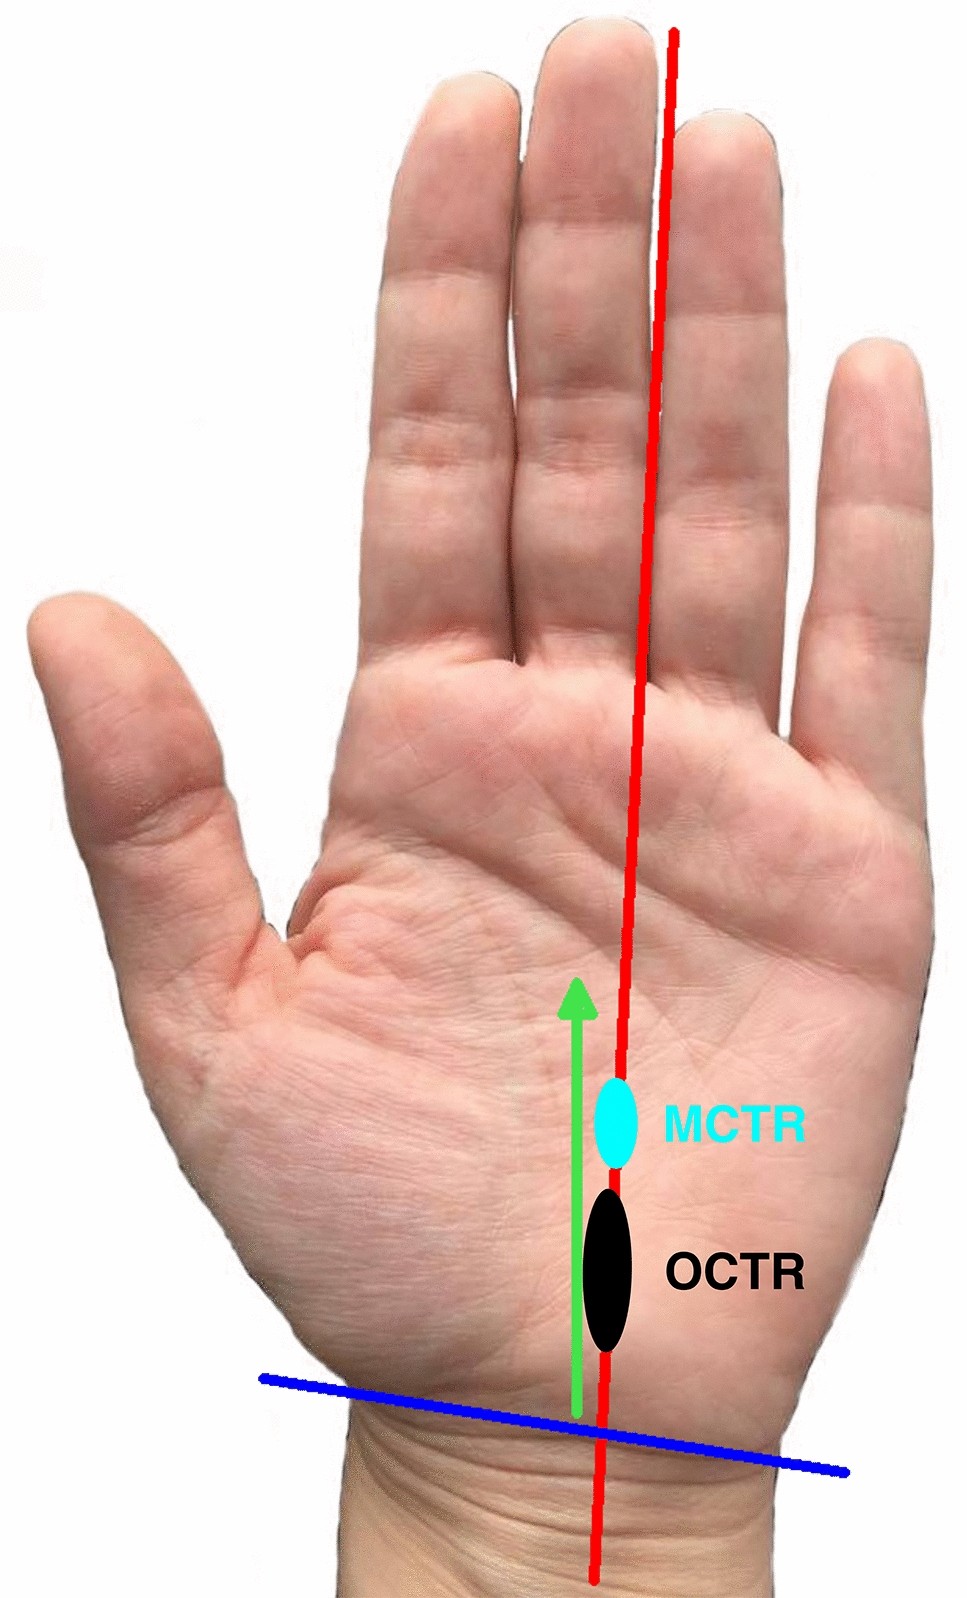 Mini-open carpal tunnel release: technique, feasibility and clinical  outcome compared to the conventional procedure in a long-term follow-up